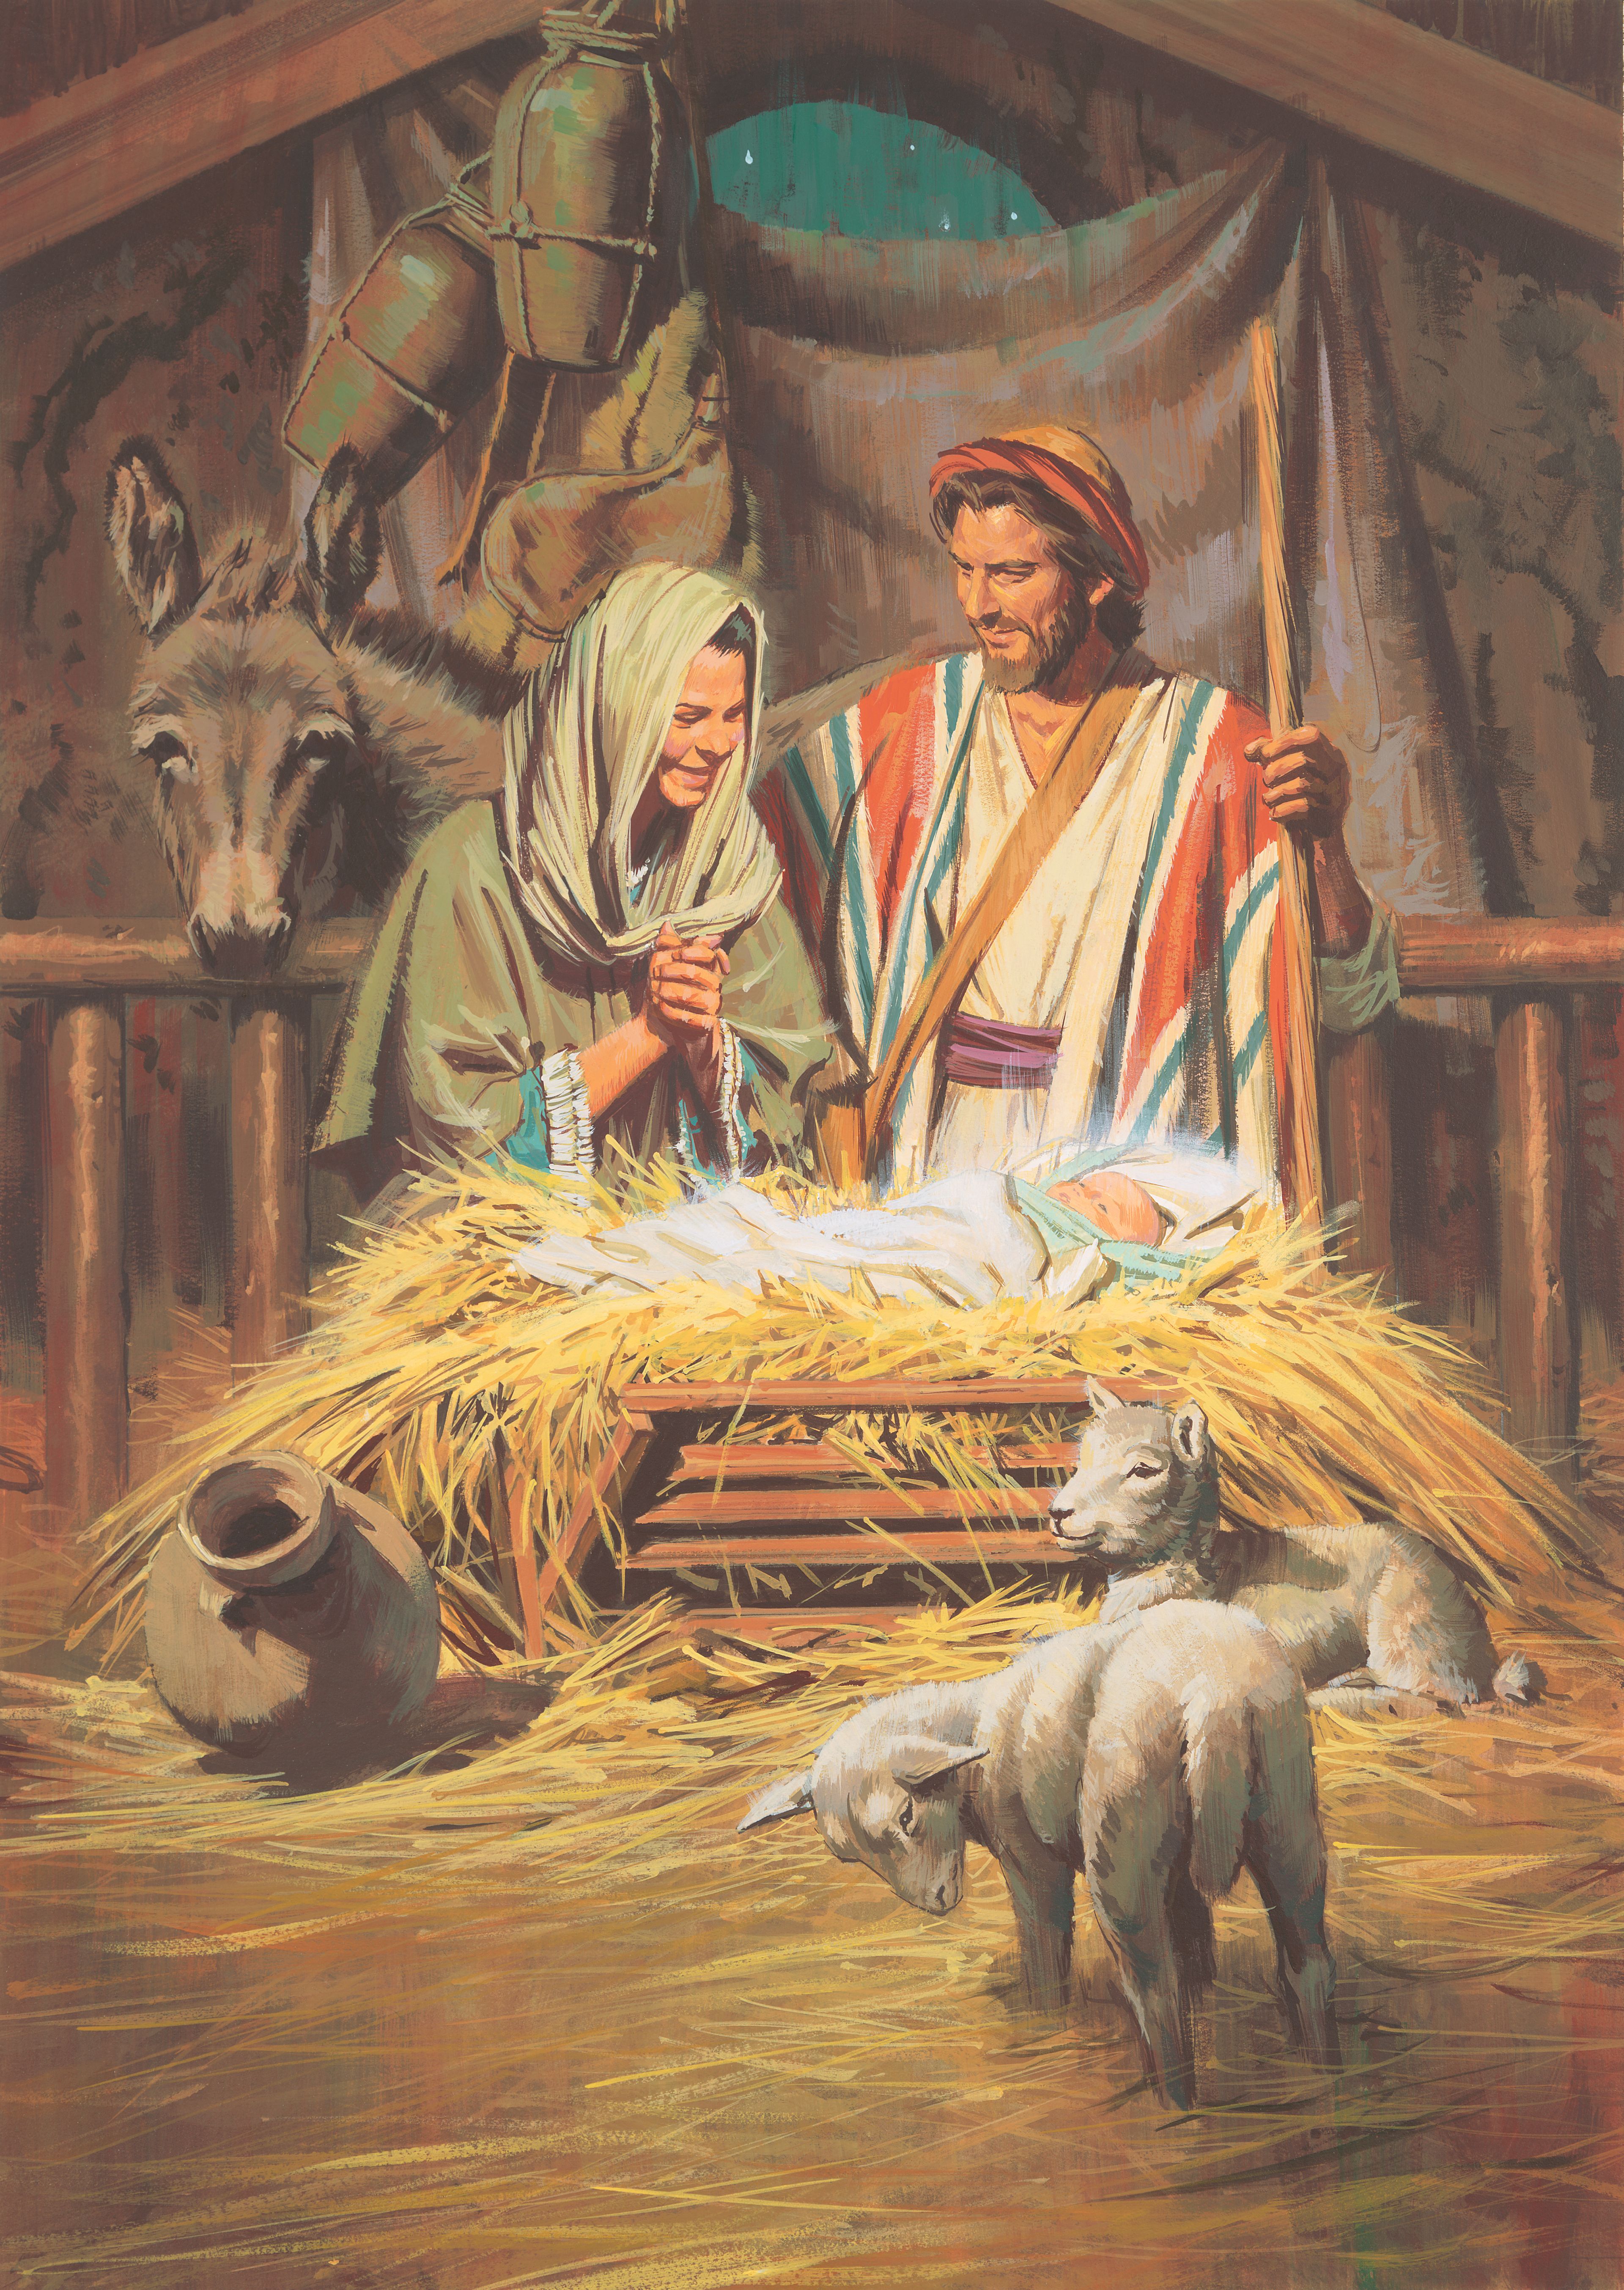 An image of the Nativity scene.